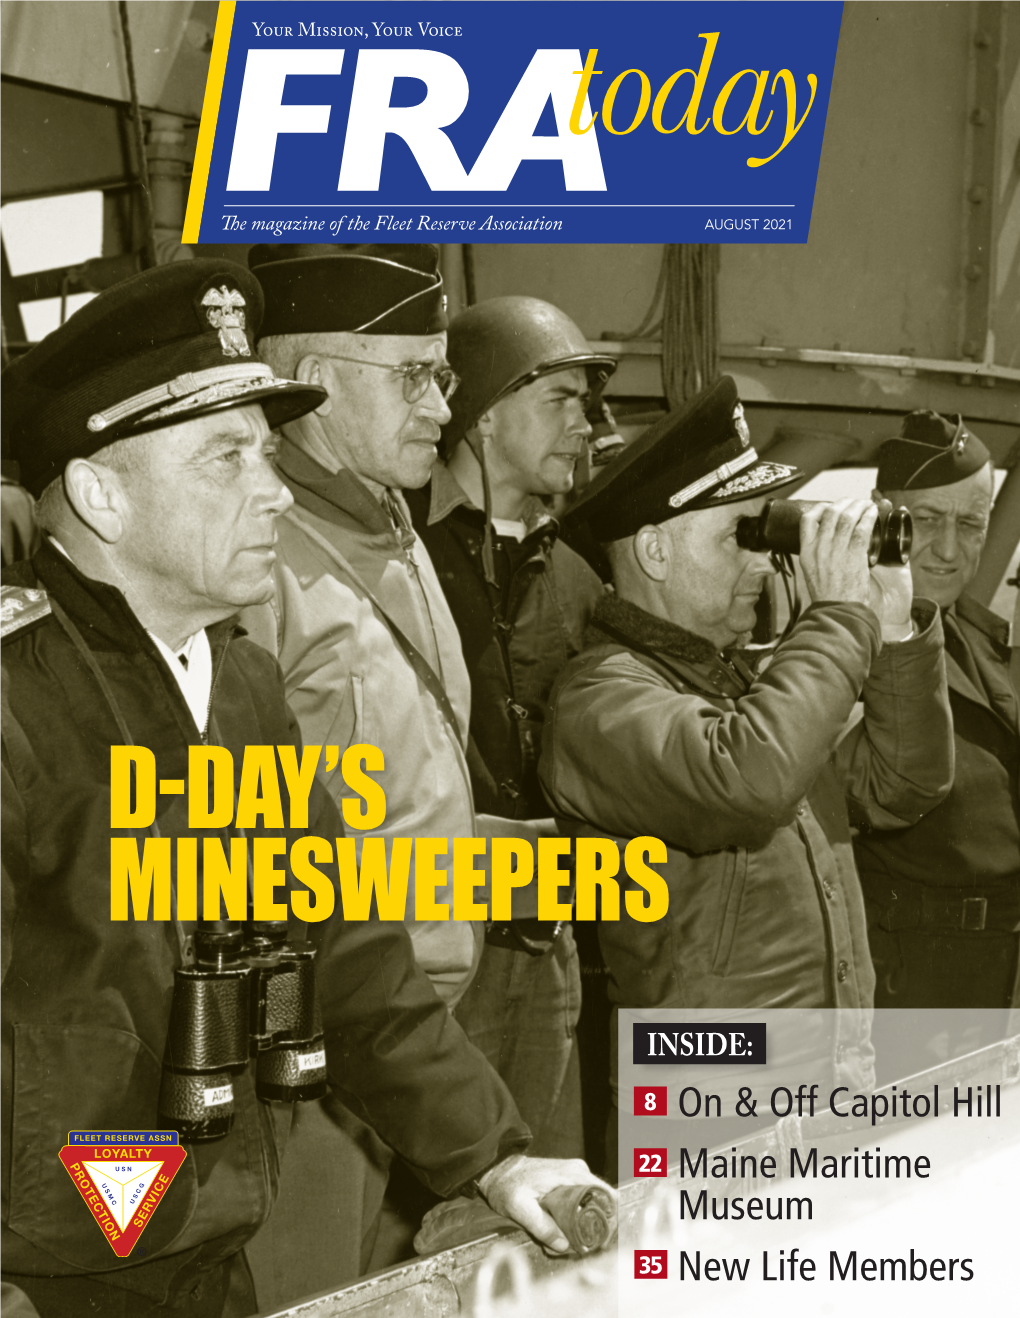 D-Day's Minesweepers